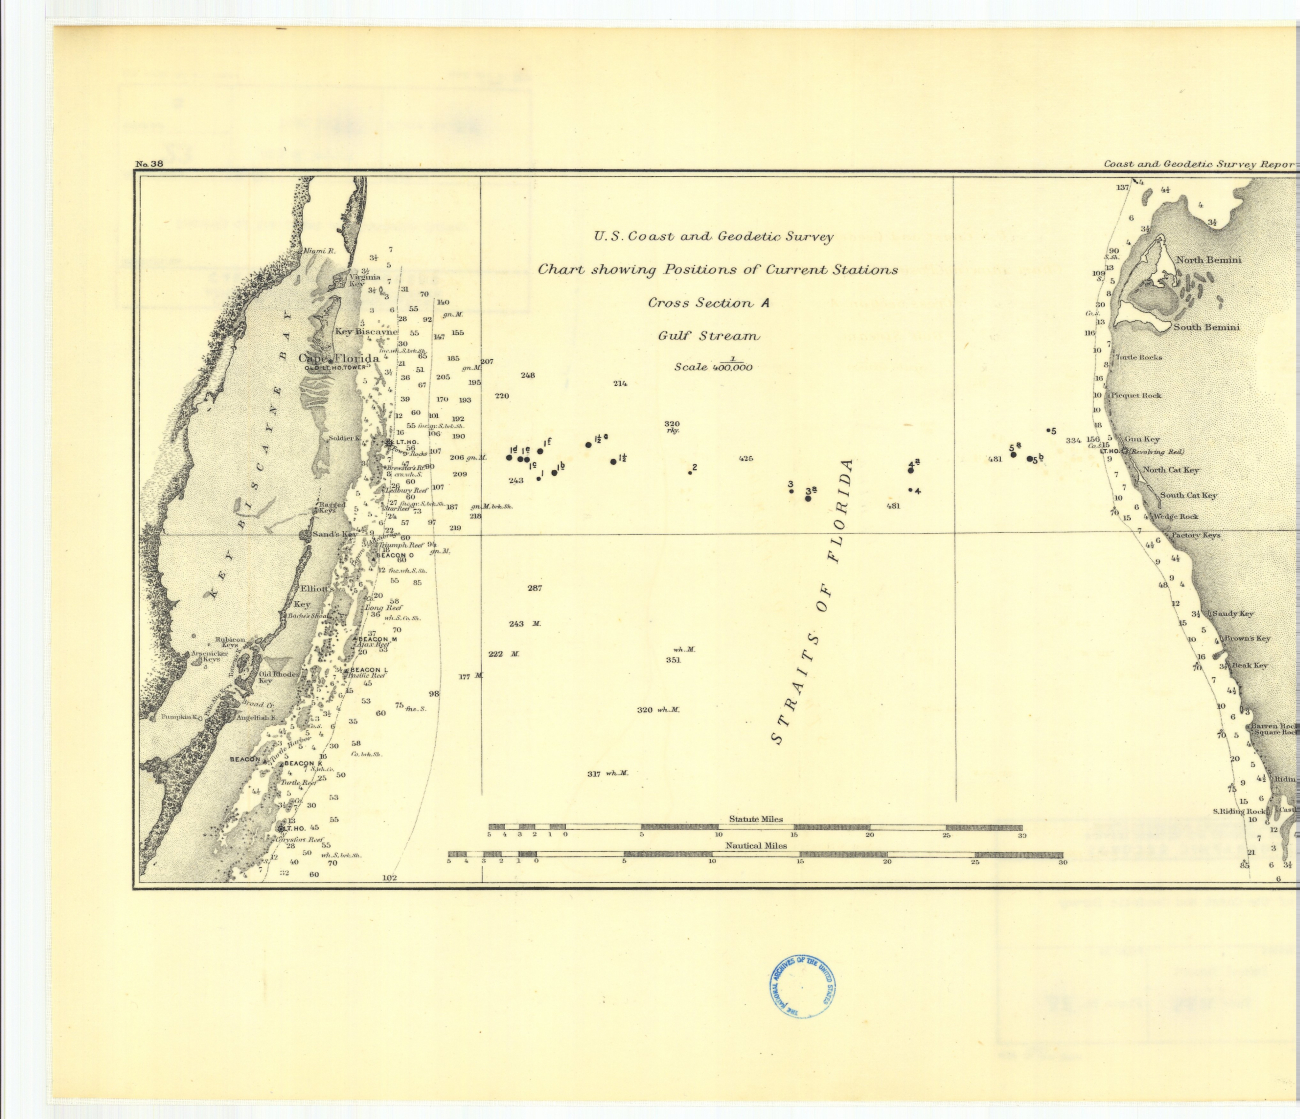 Chart showing position of current stations in the Gulf Stream produced as result of work by Henry Mitchell in 1867